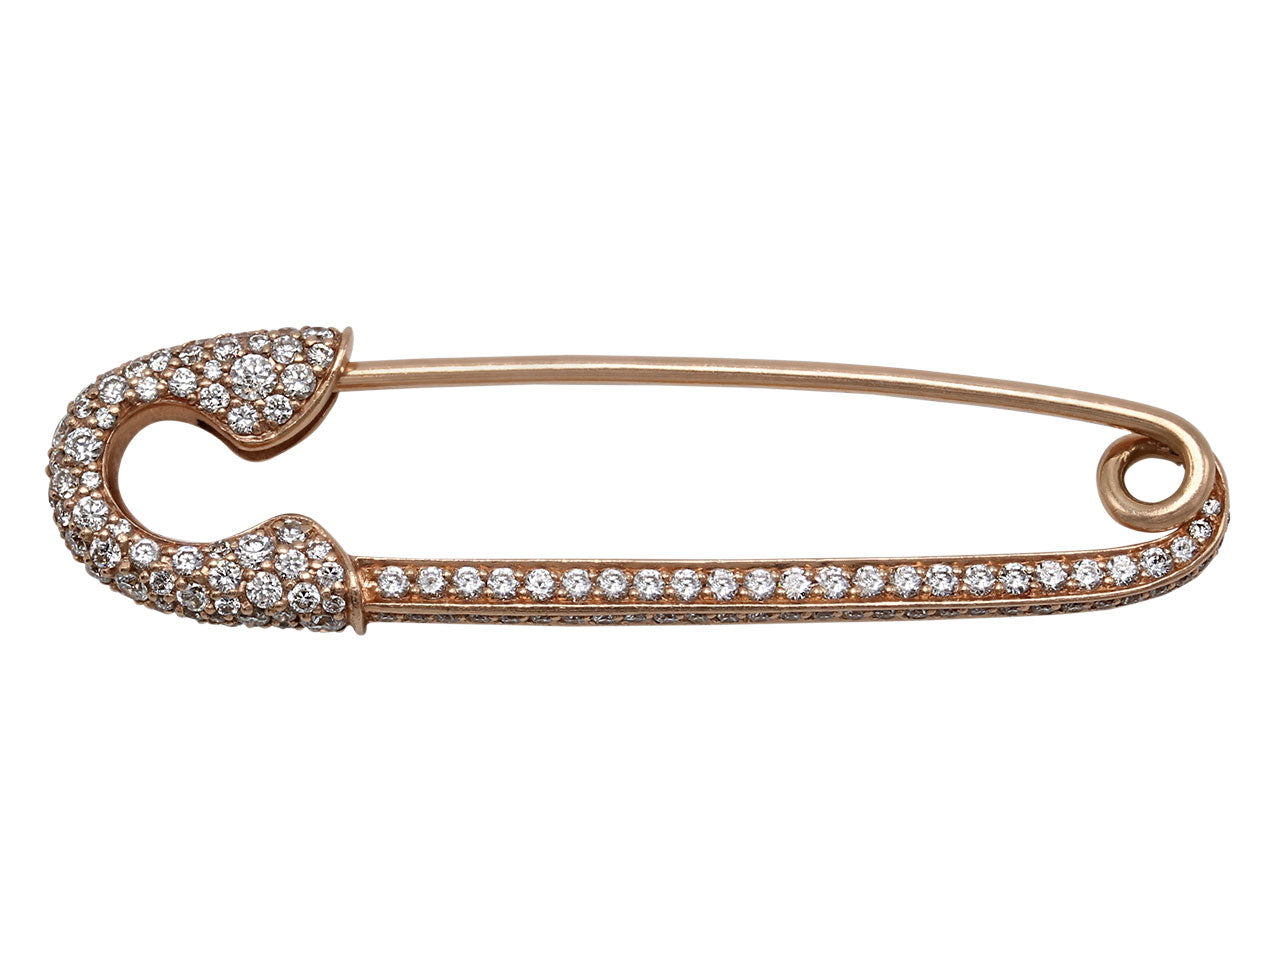 Crow's Nest 'Safety First' Brooch in 18K Rose Gold